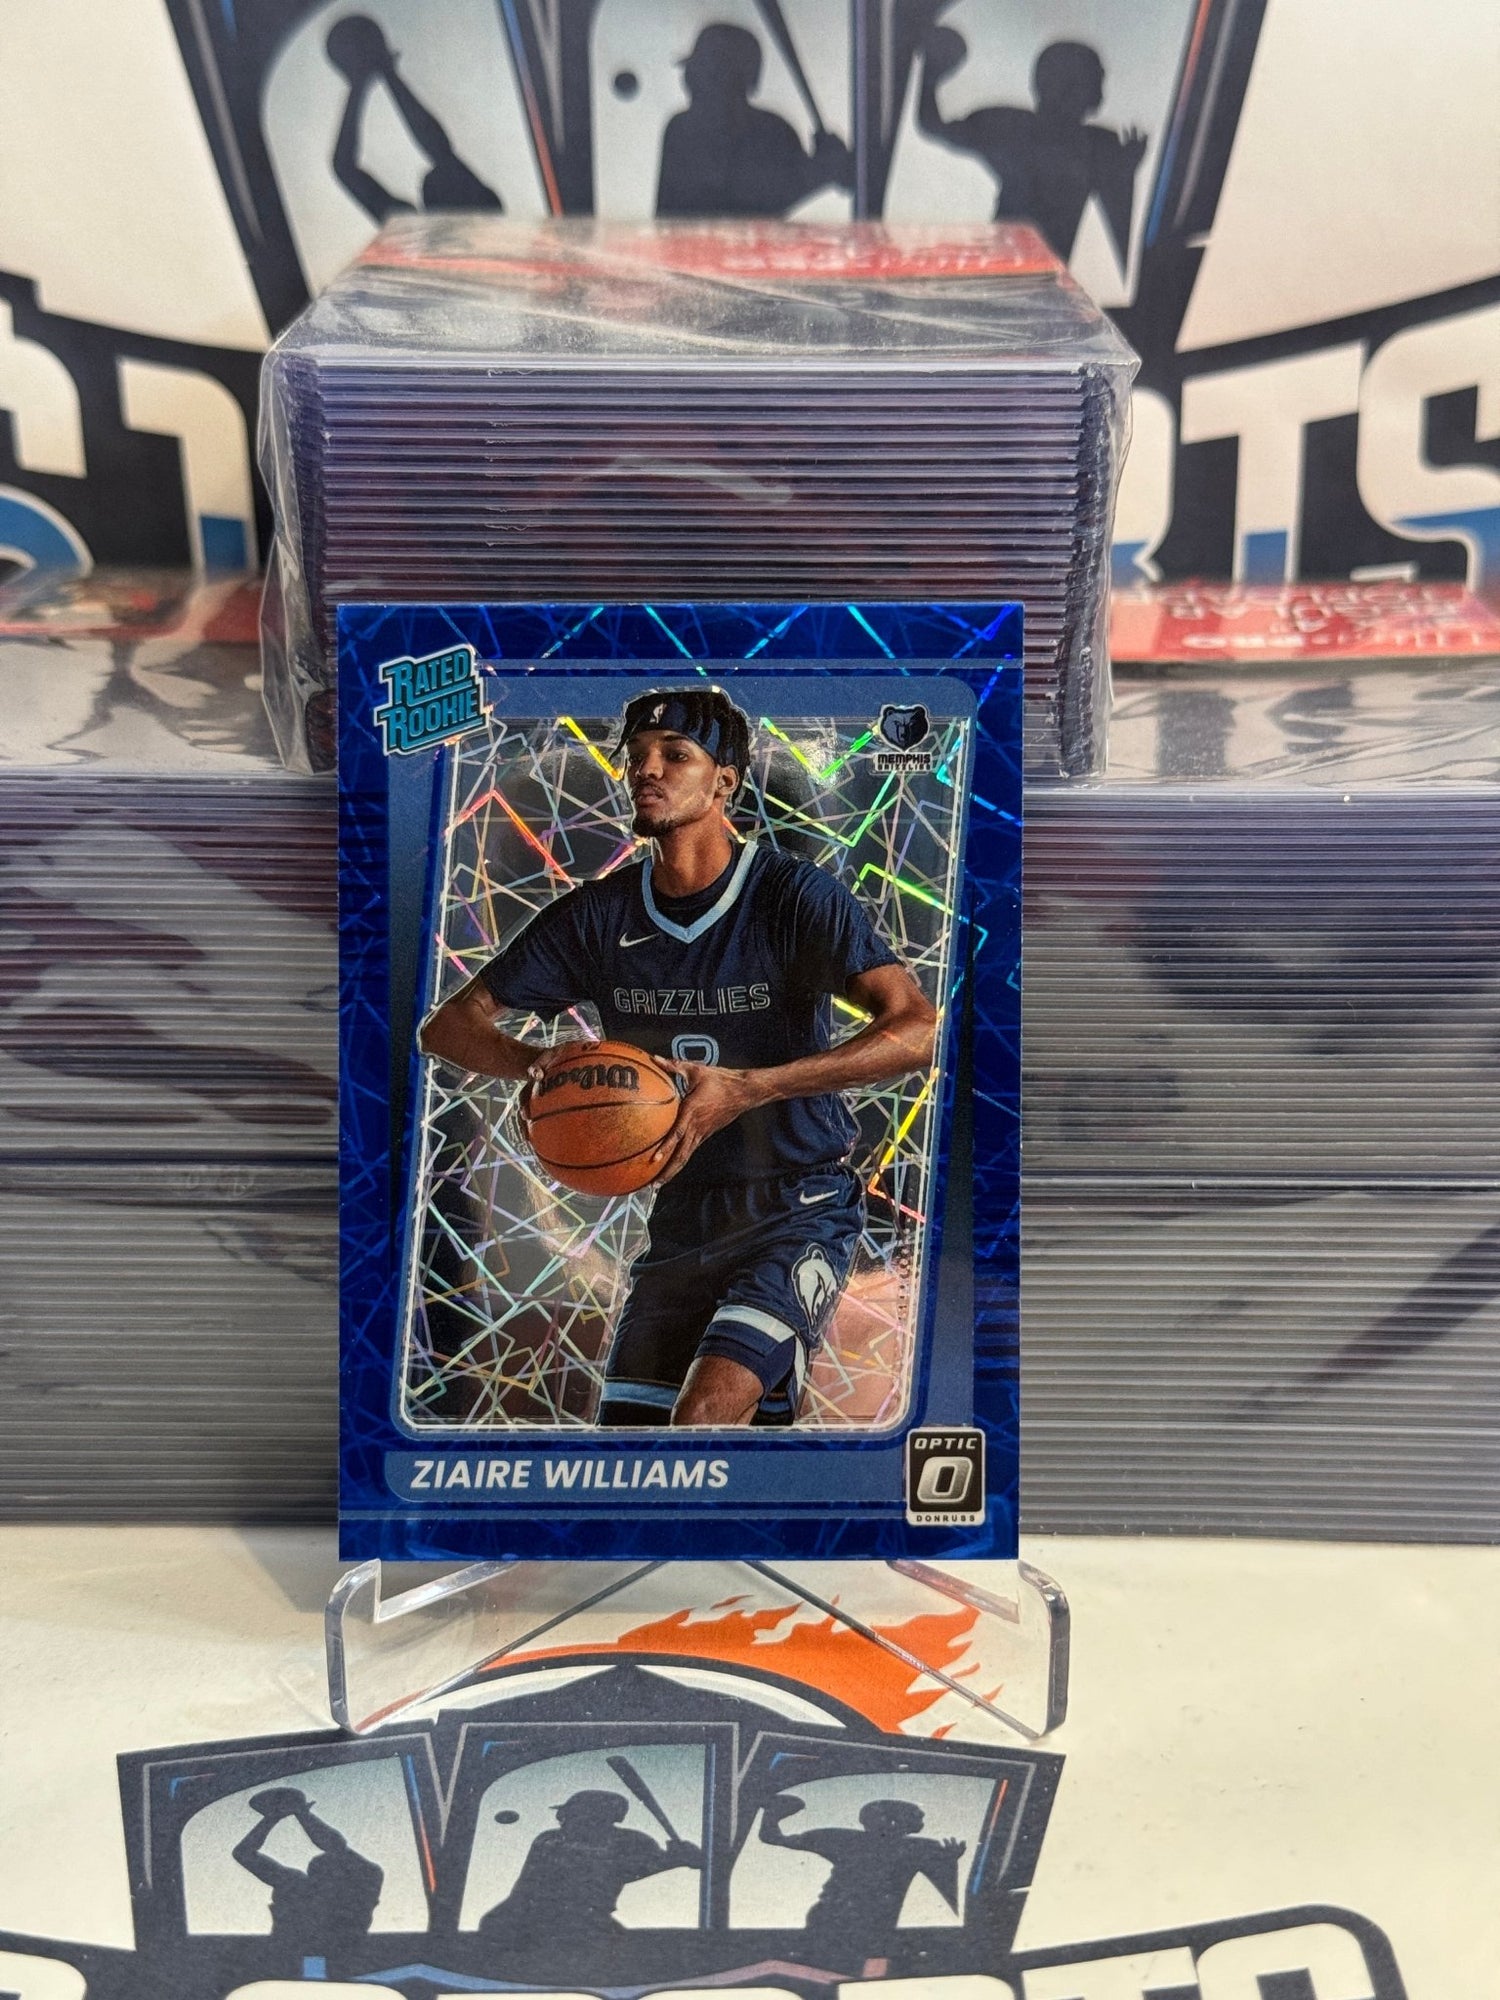 2021 Donruss Optic (Blue Velocity Prizm, Rated Rookie) Ziaire Williams #198